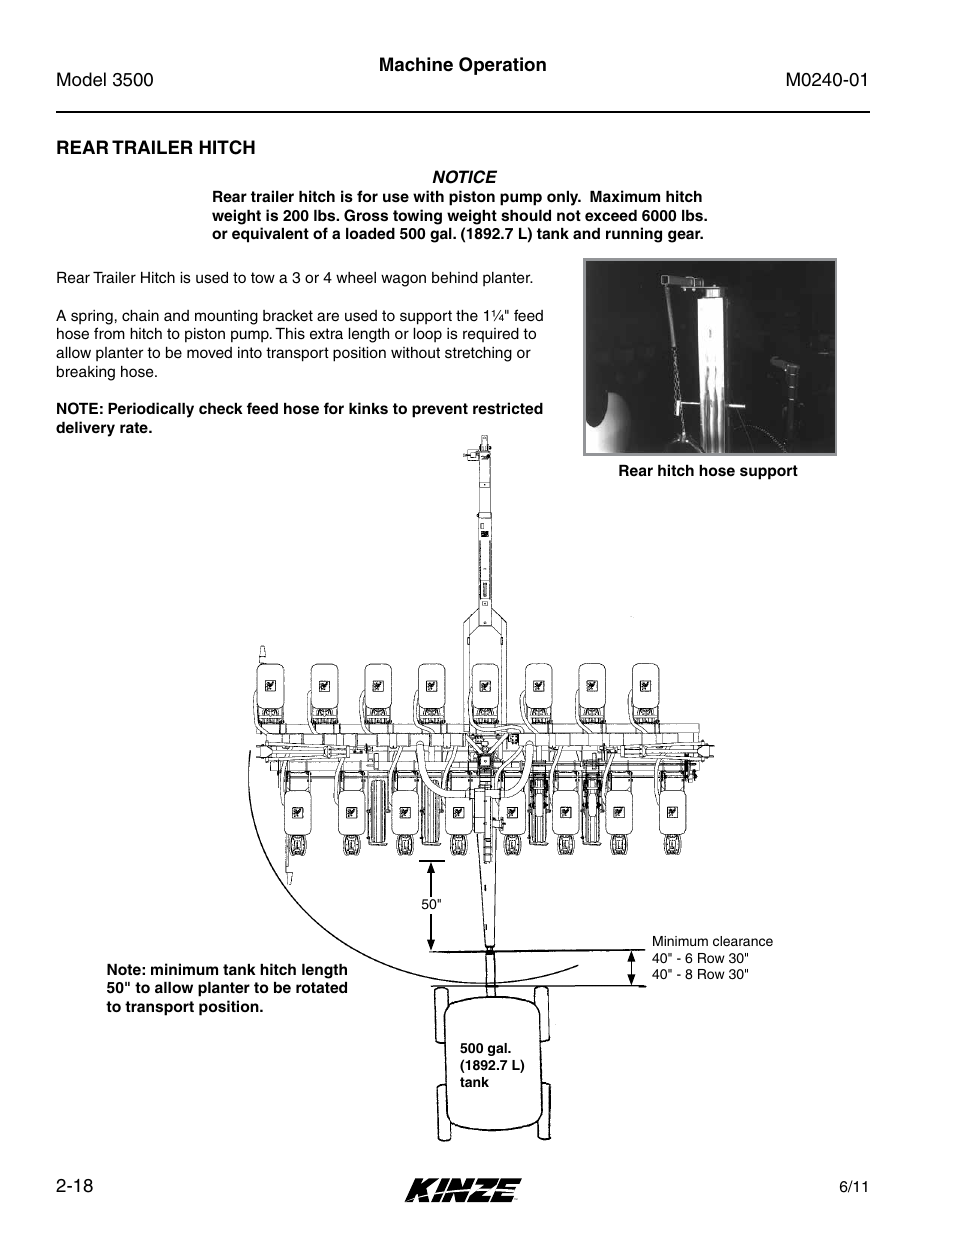 Rear trailer hitch, Rear trailer hitch -18 | Kinze 3500 Lift and Rotate Planter Rev. 7/14 User Manual | Page 30 / 140